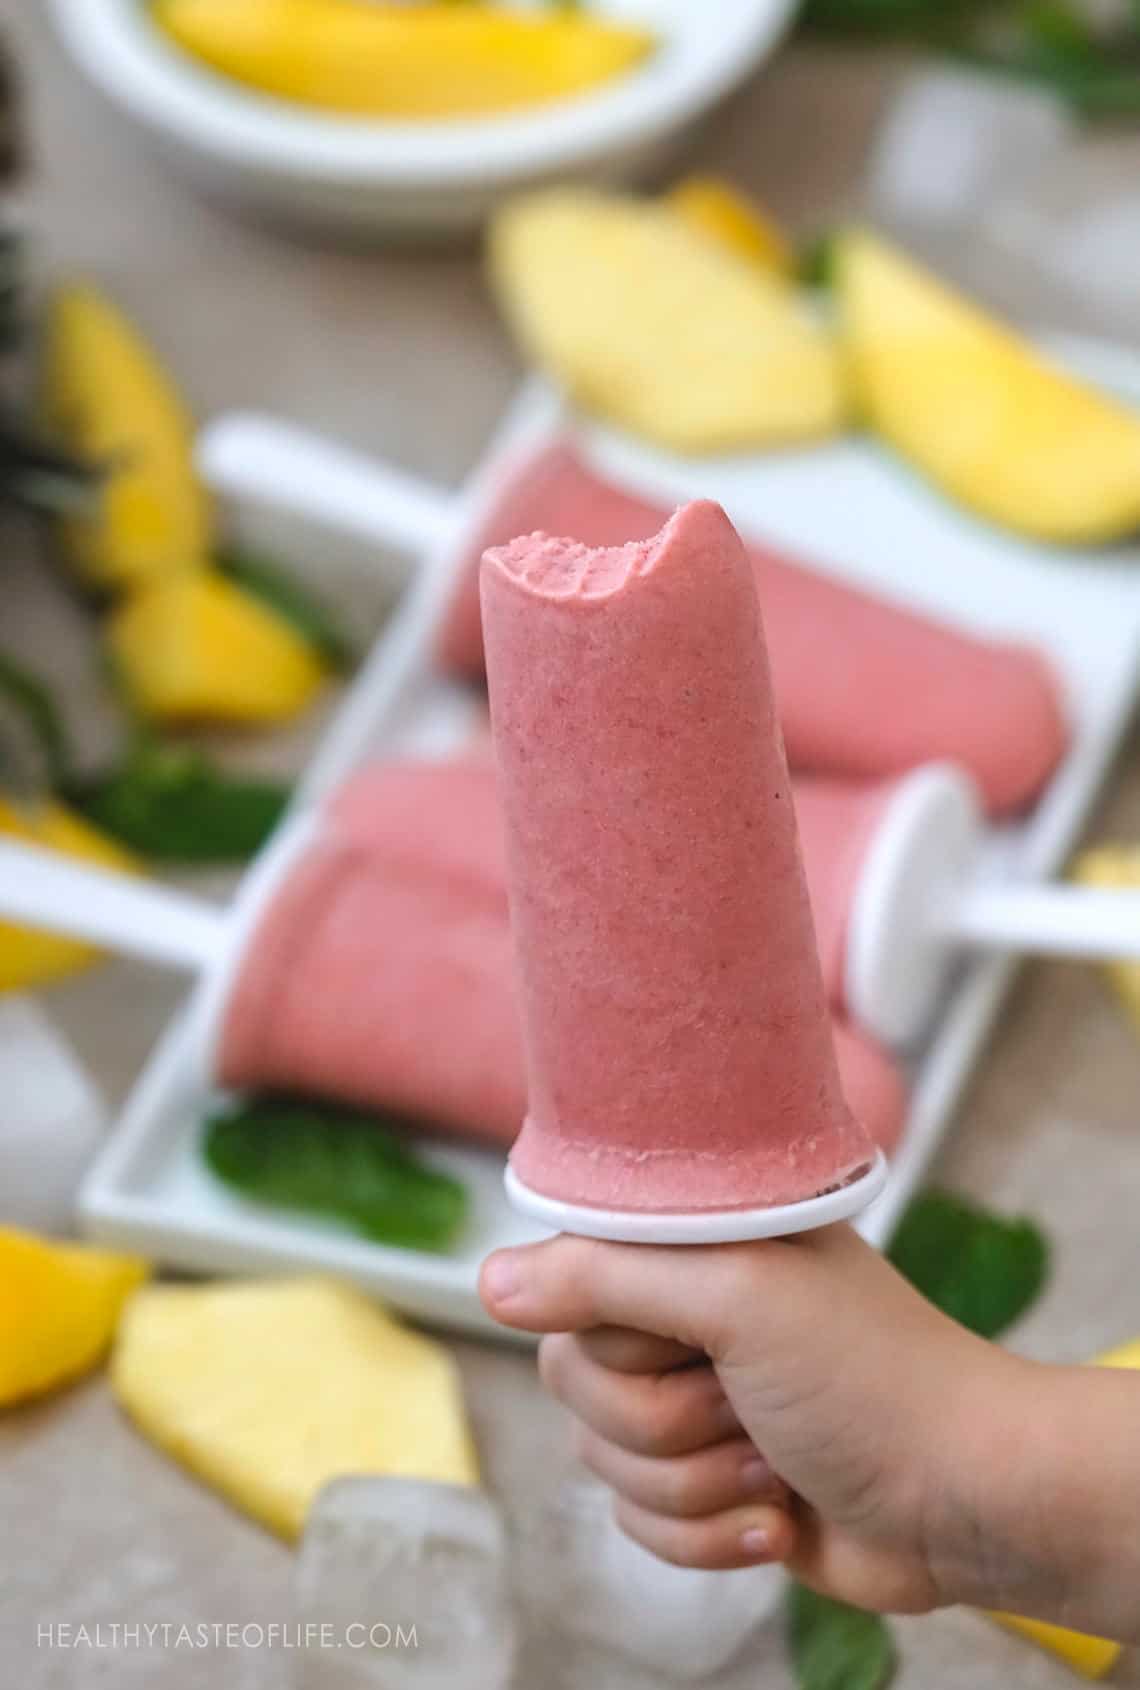 Creamy sugar free popsicles made with whole tropical fruits. Tropical ice pops or popsicle perfect for kids and adults. #popsicles #icepops #fruitpops #healthypopsicles